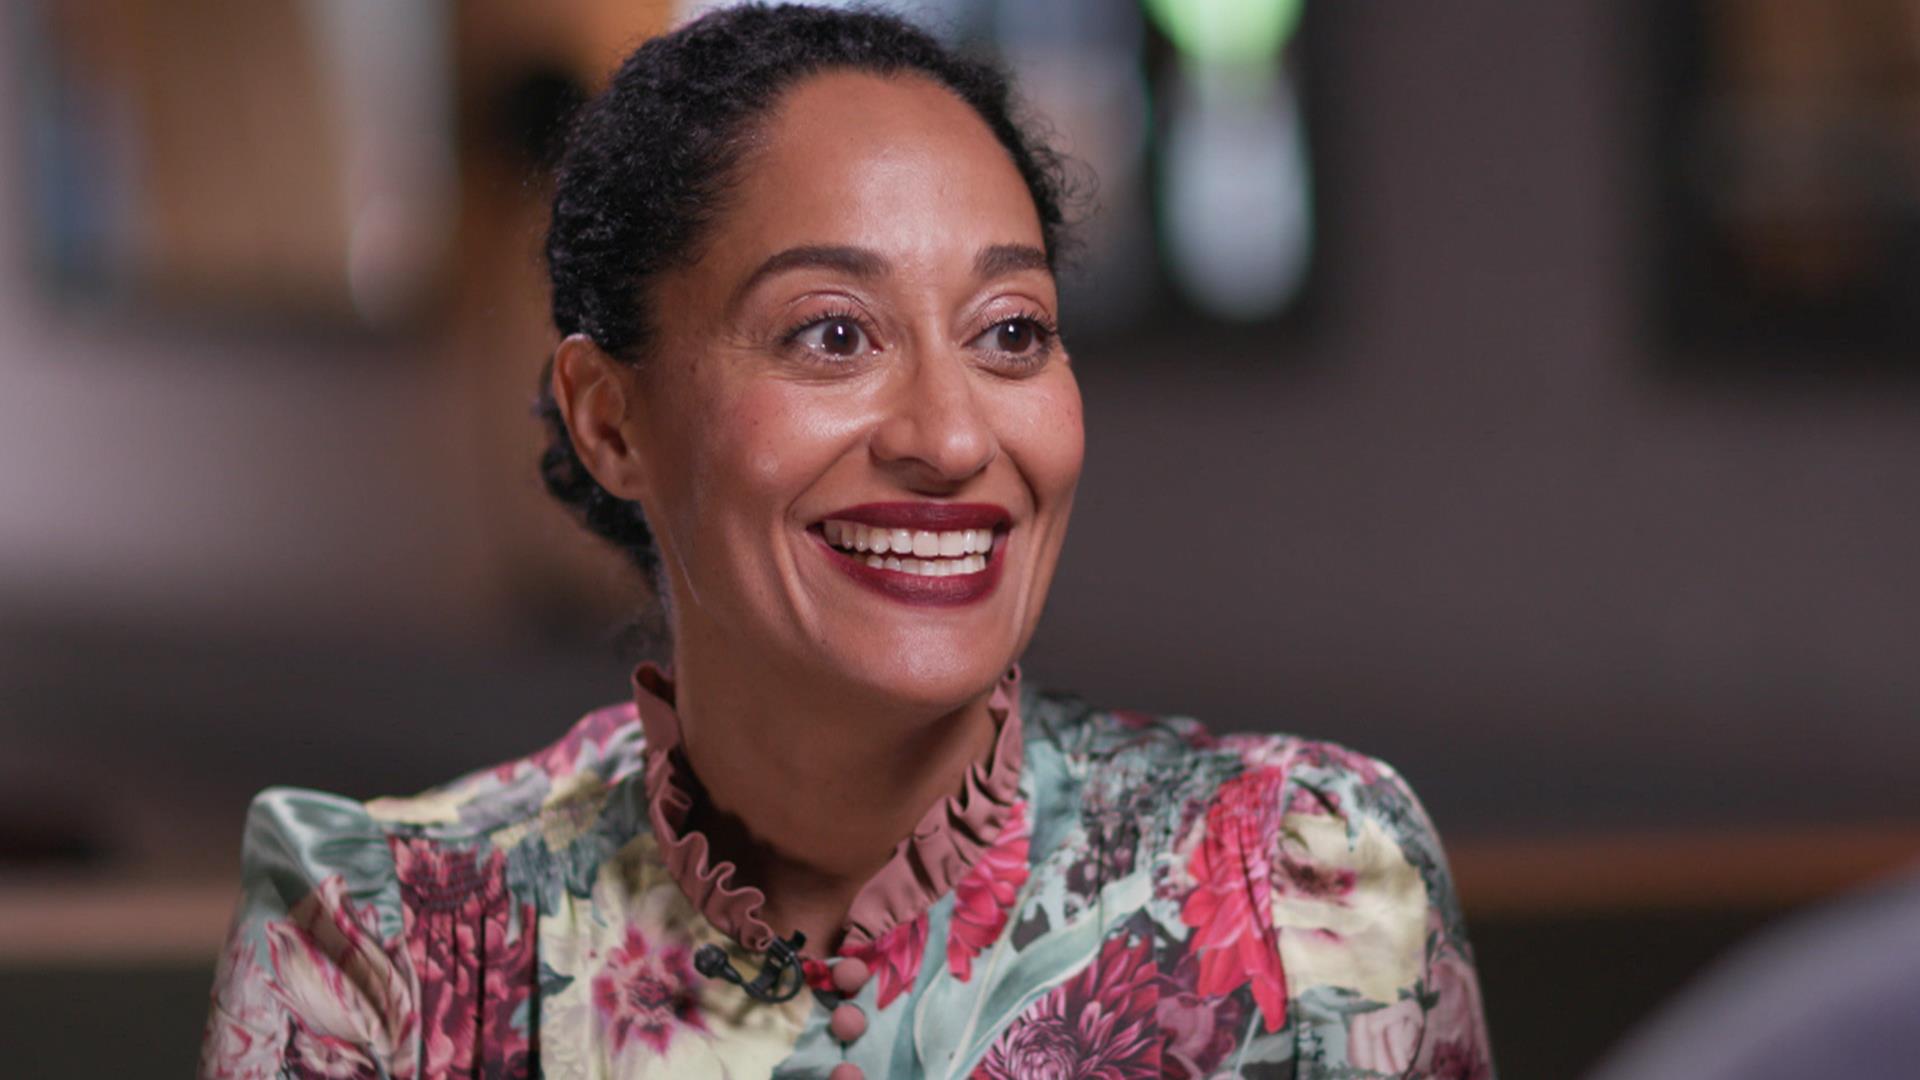 'Black-ish' star Tracee Ellis Ross: Acting makes 'all aspects of me' come alive